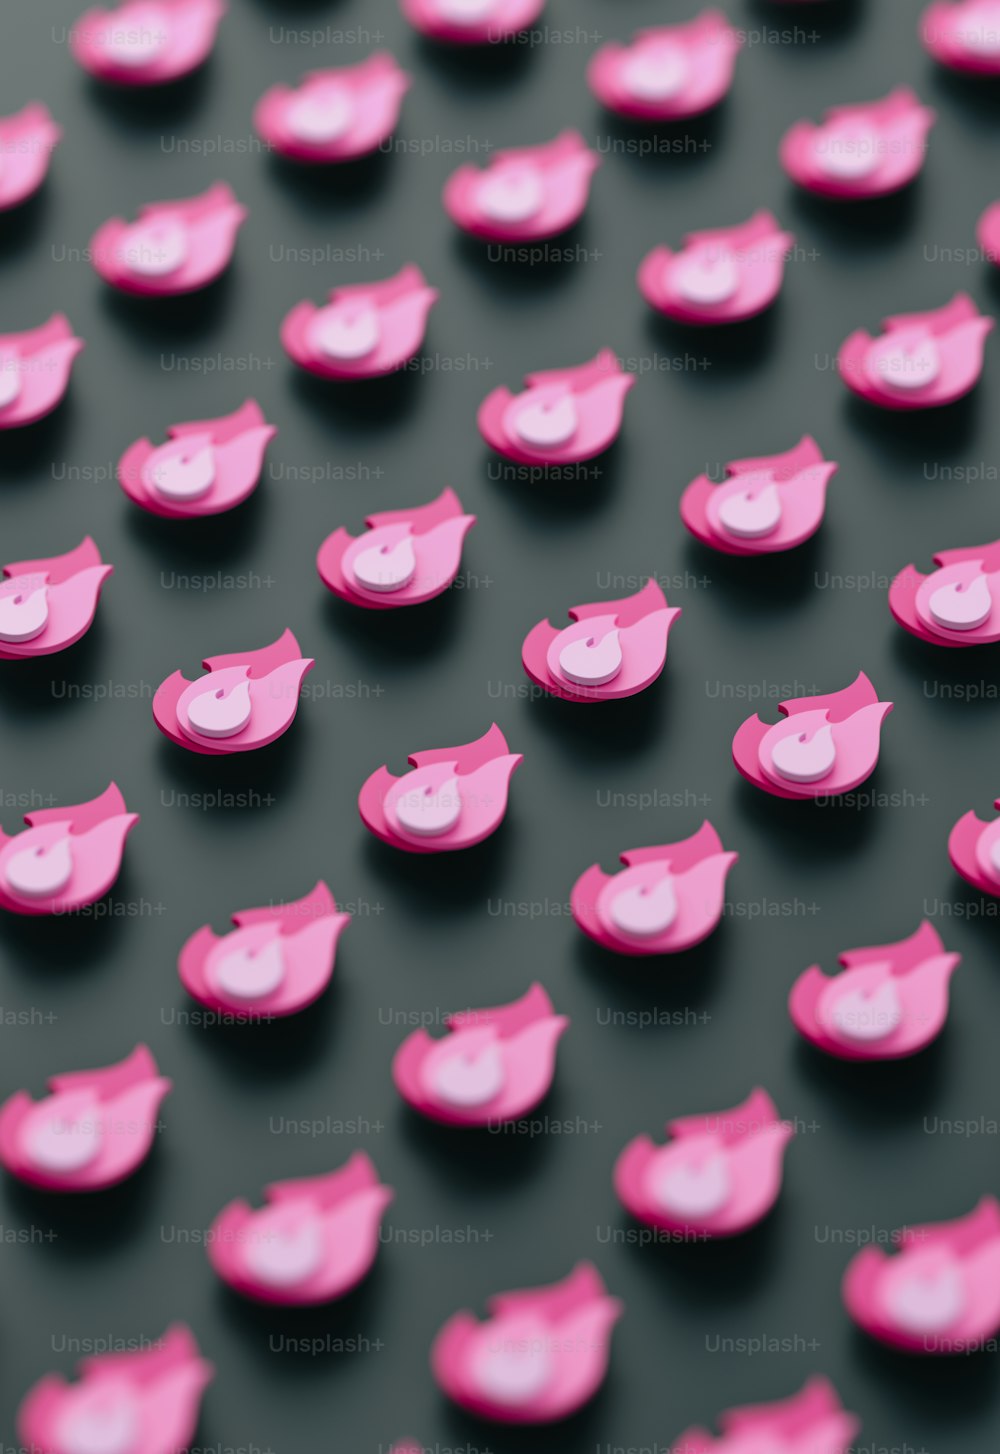 a close up of pink buttons on a black surface